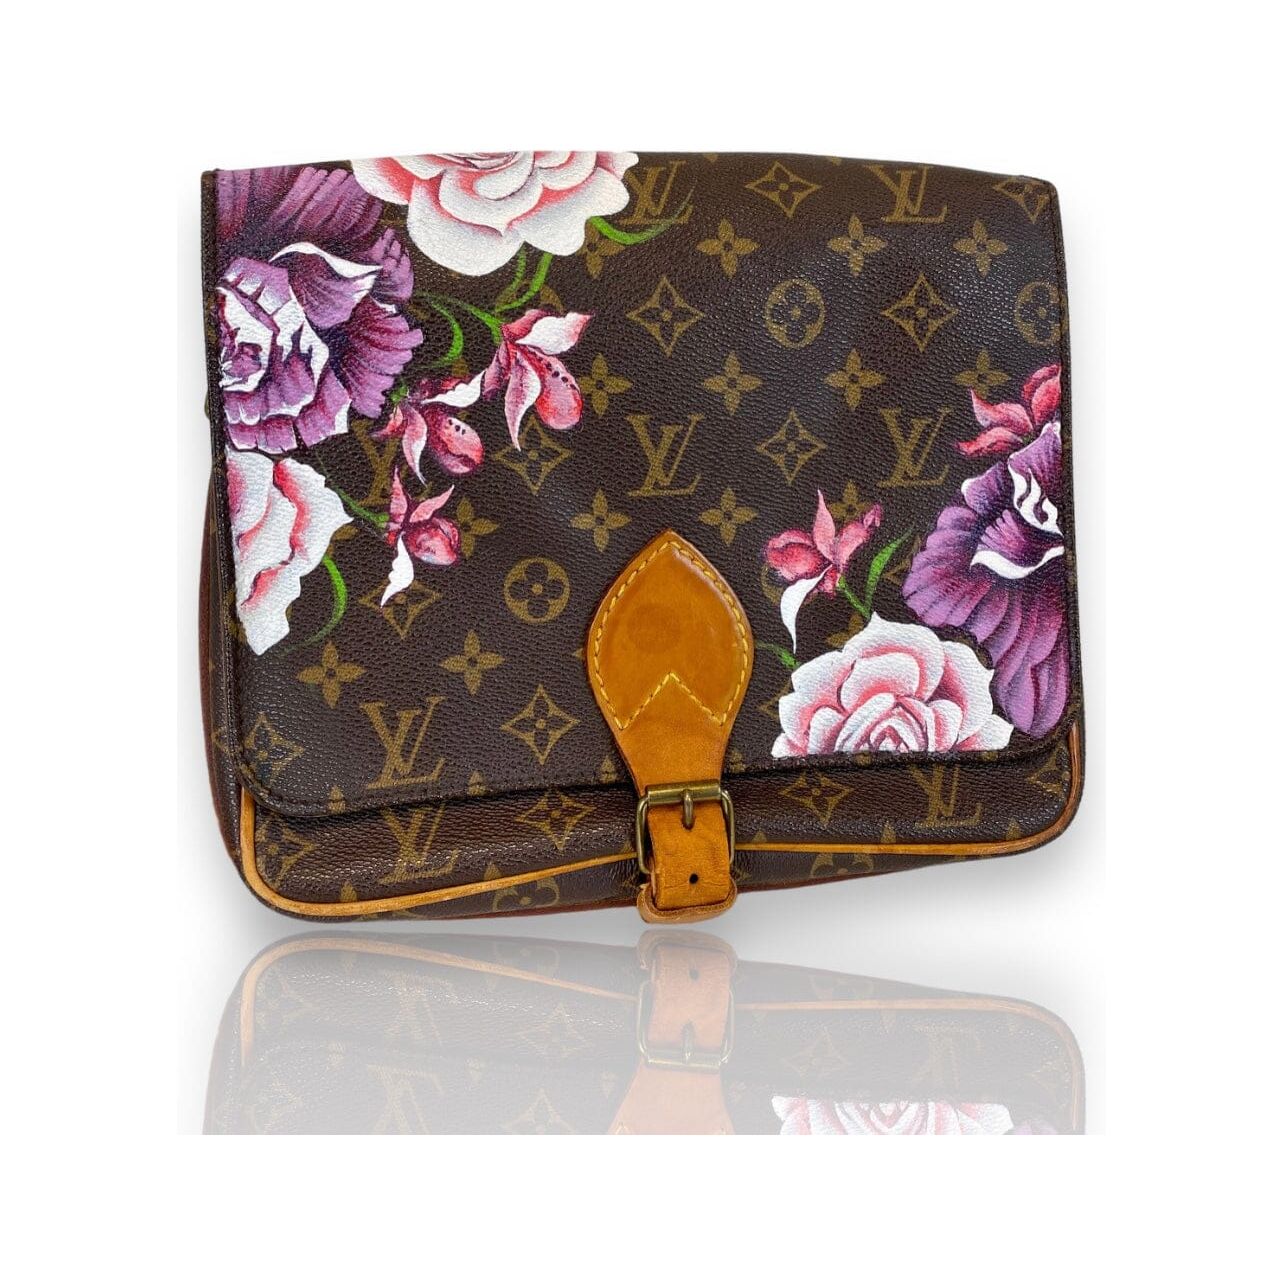 lv bag with pink flowers